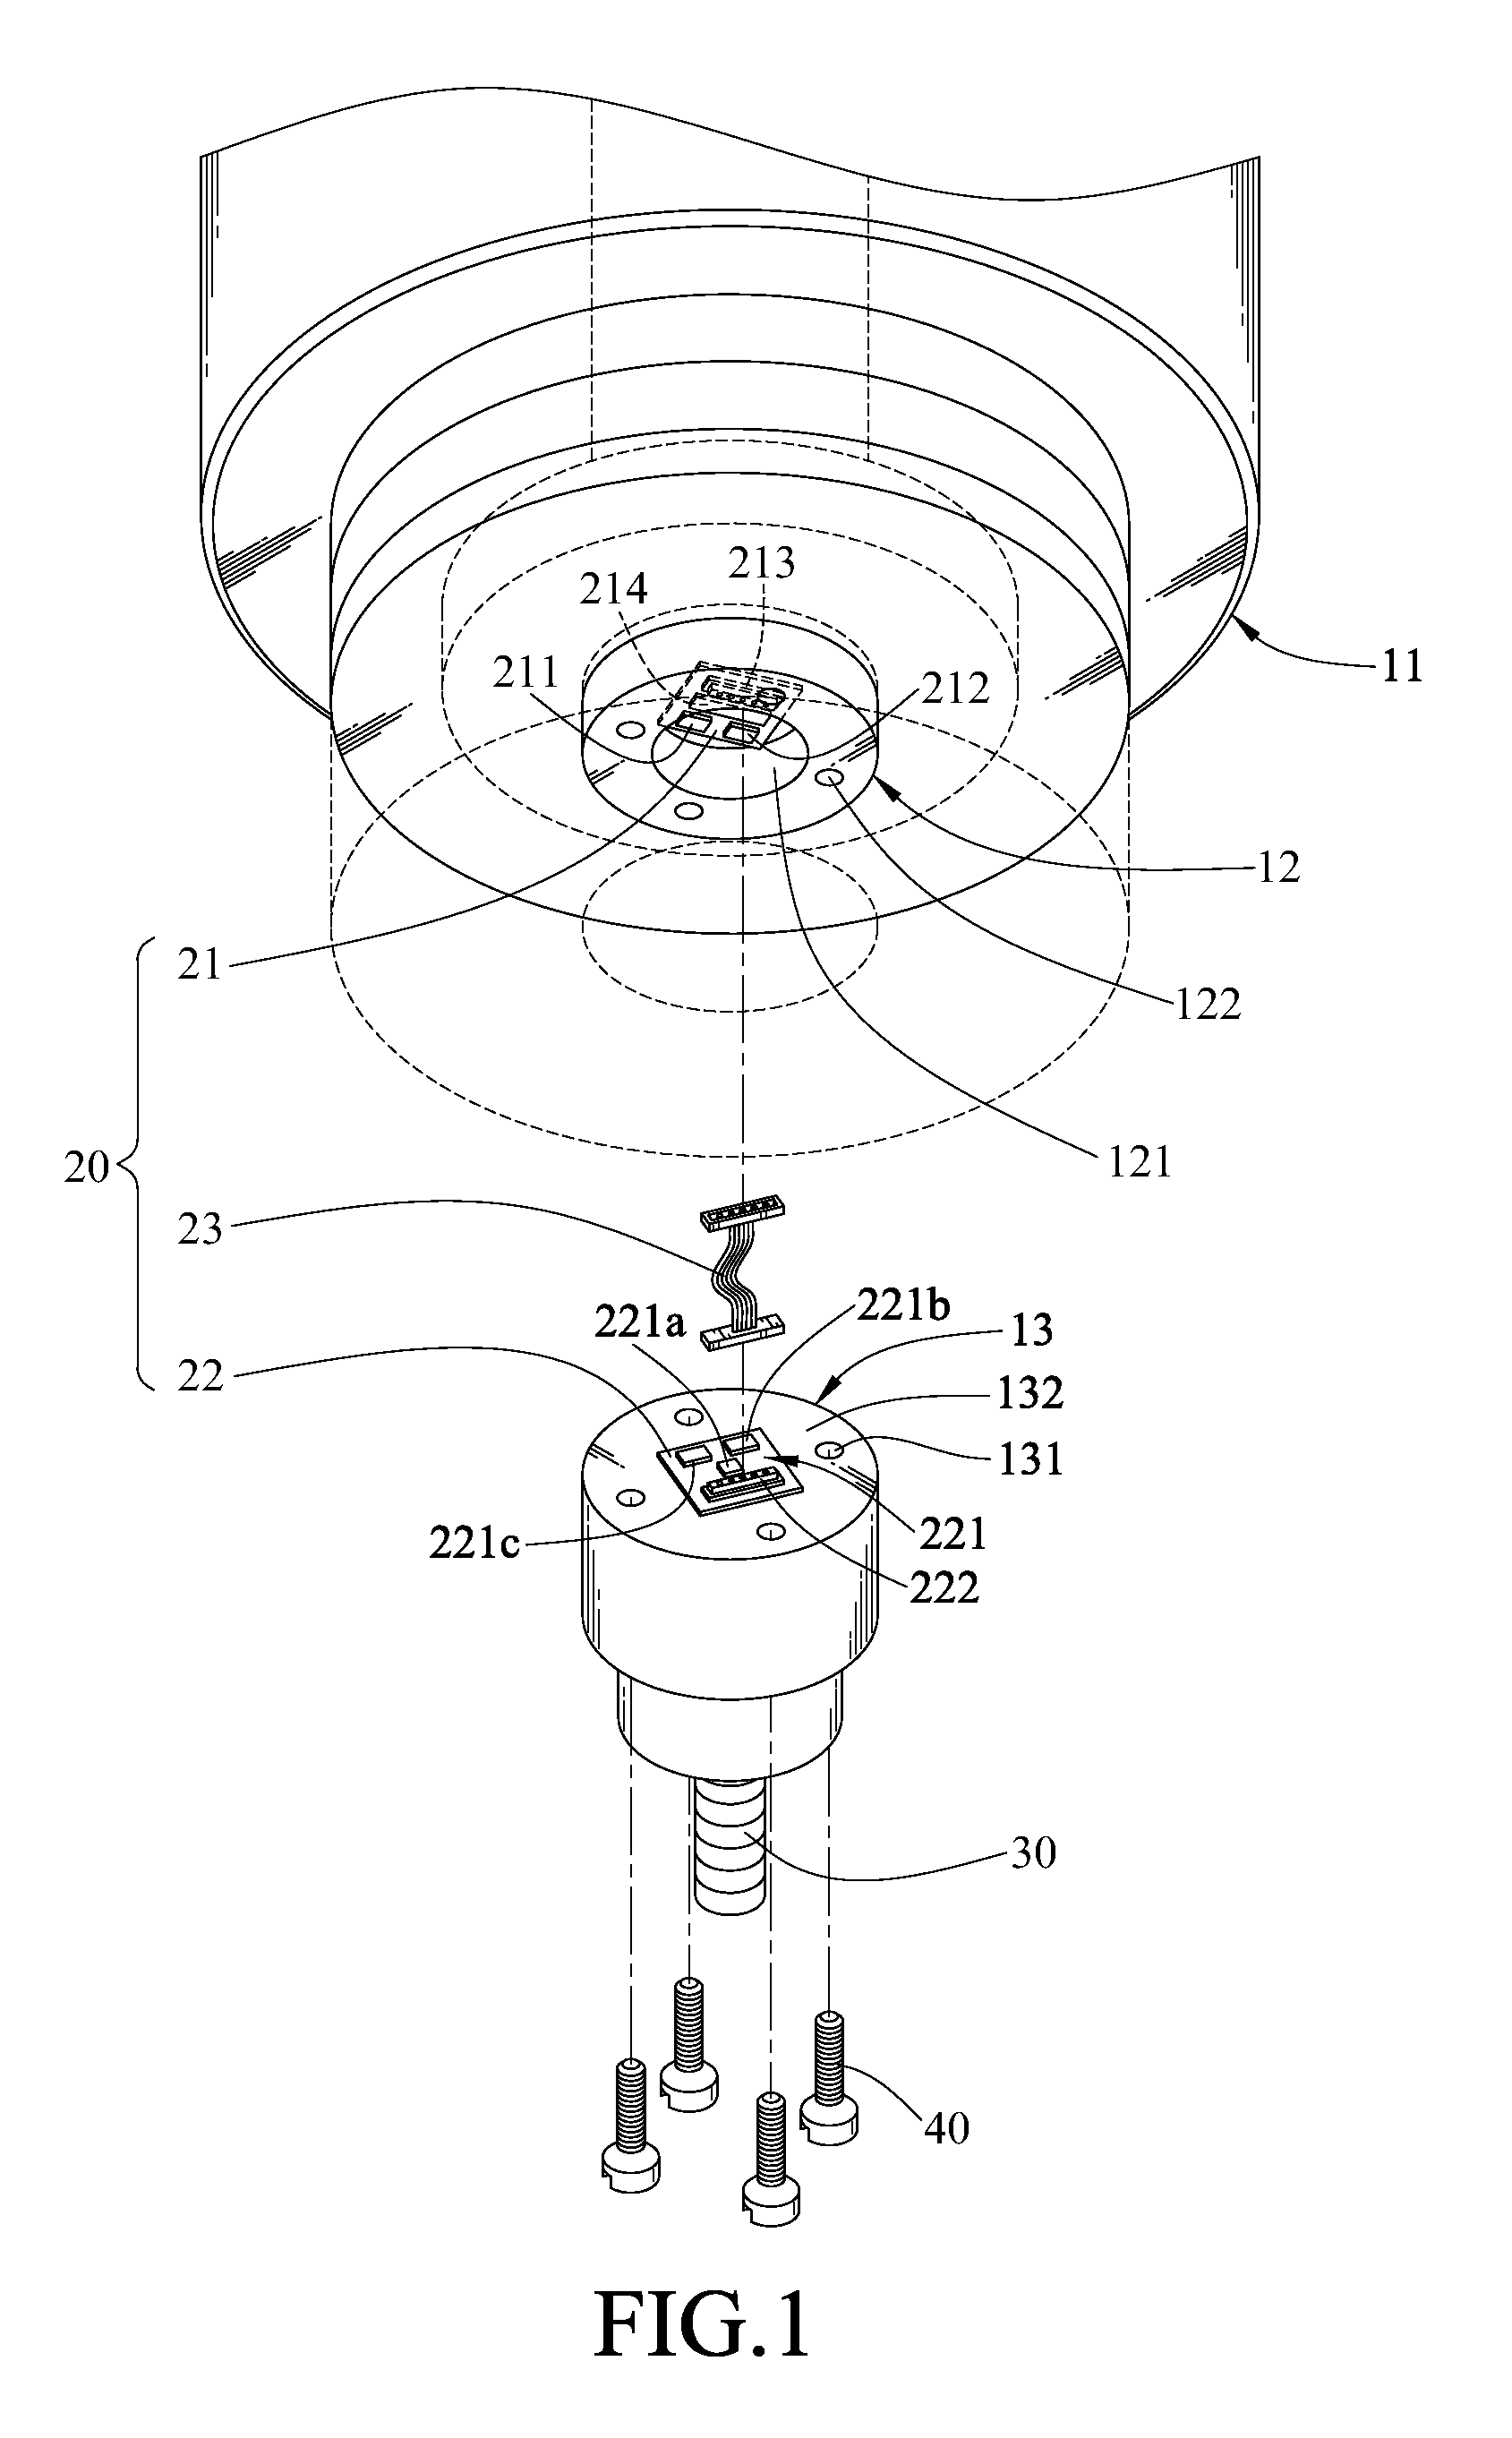 Machine tool spindle structure capable of monitoring working state in real time